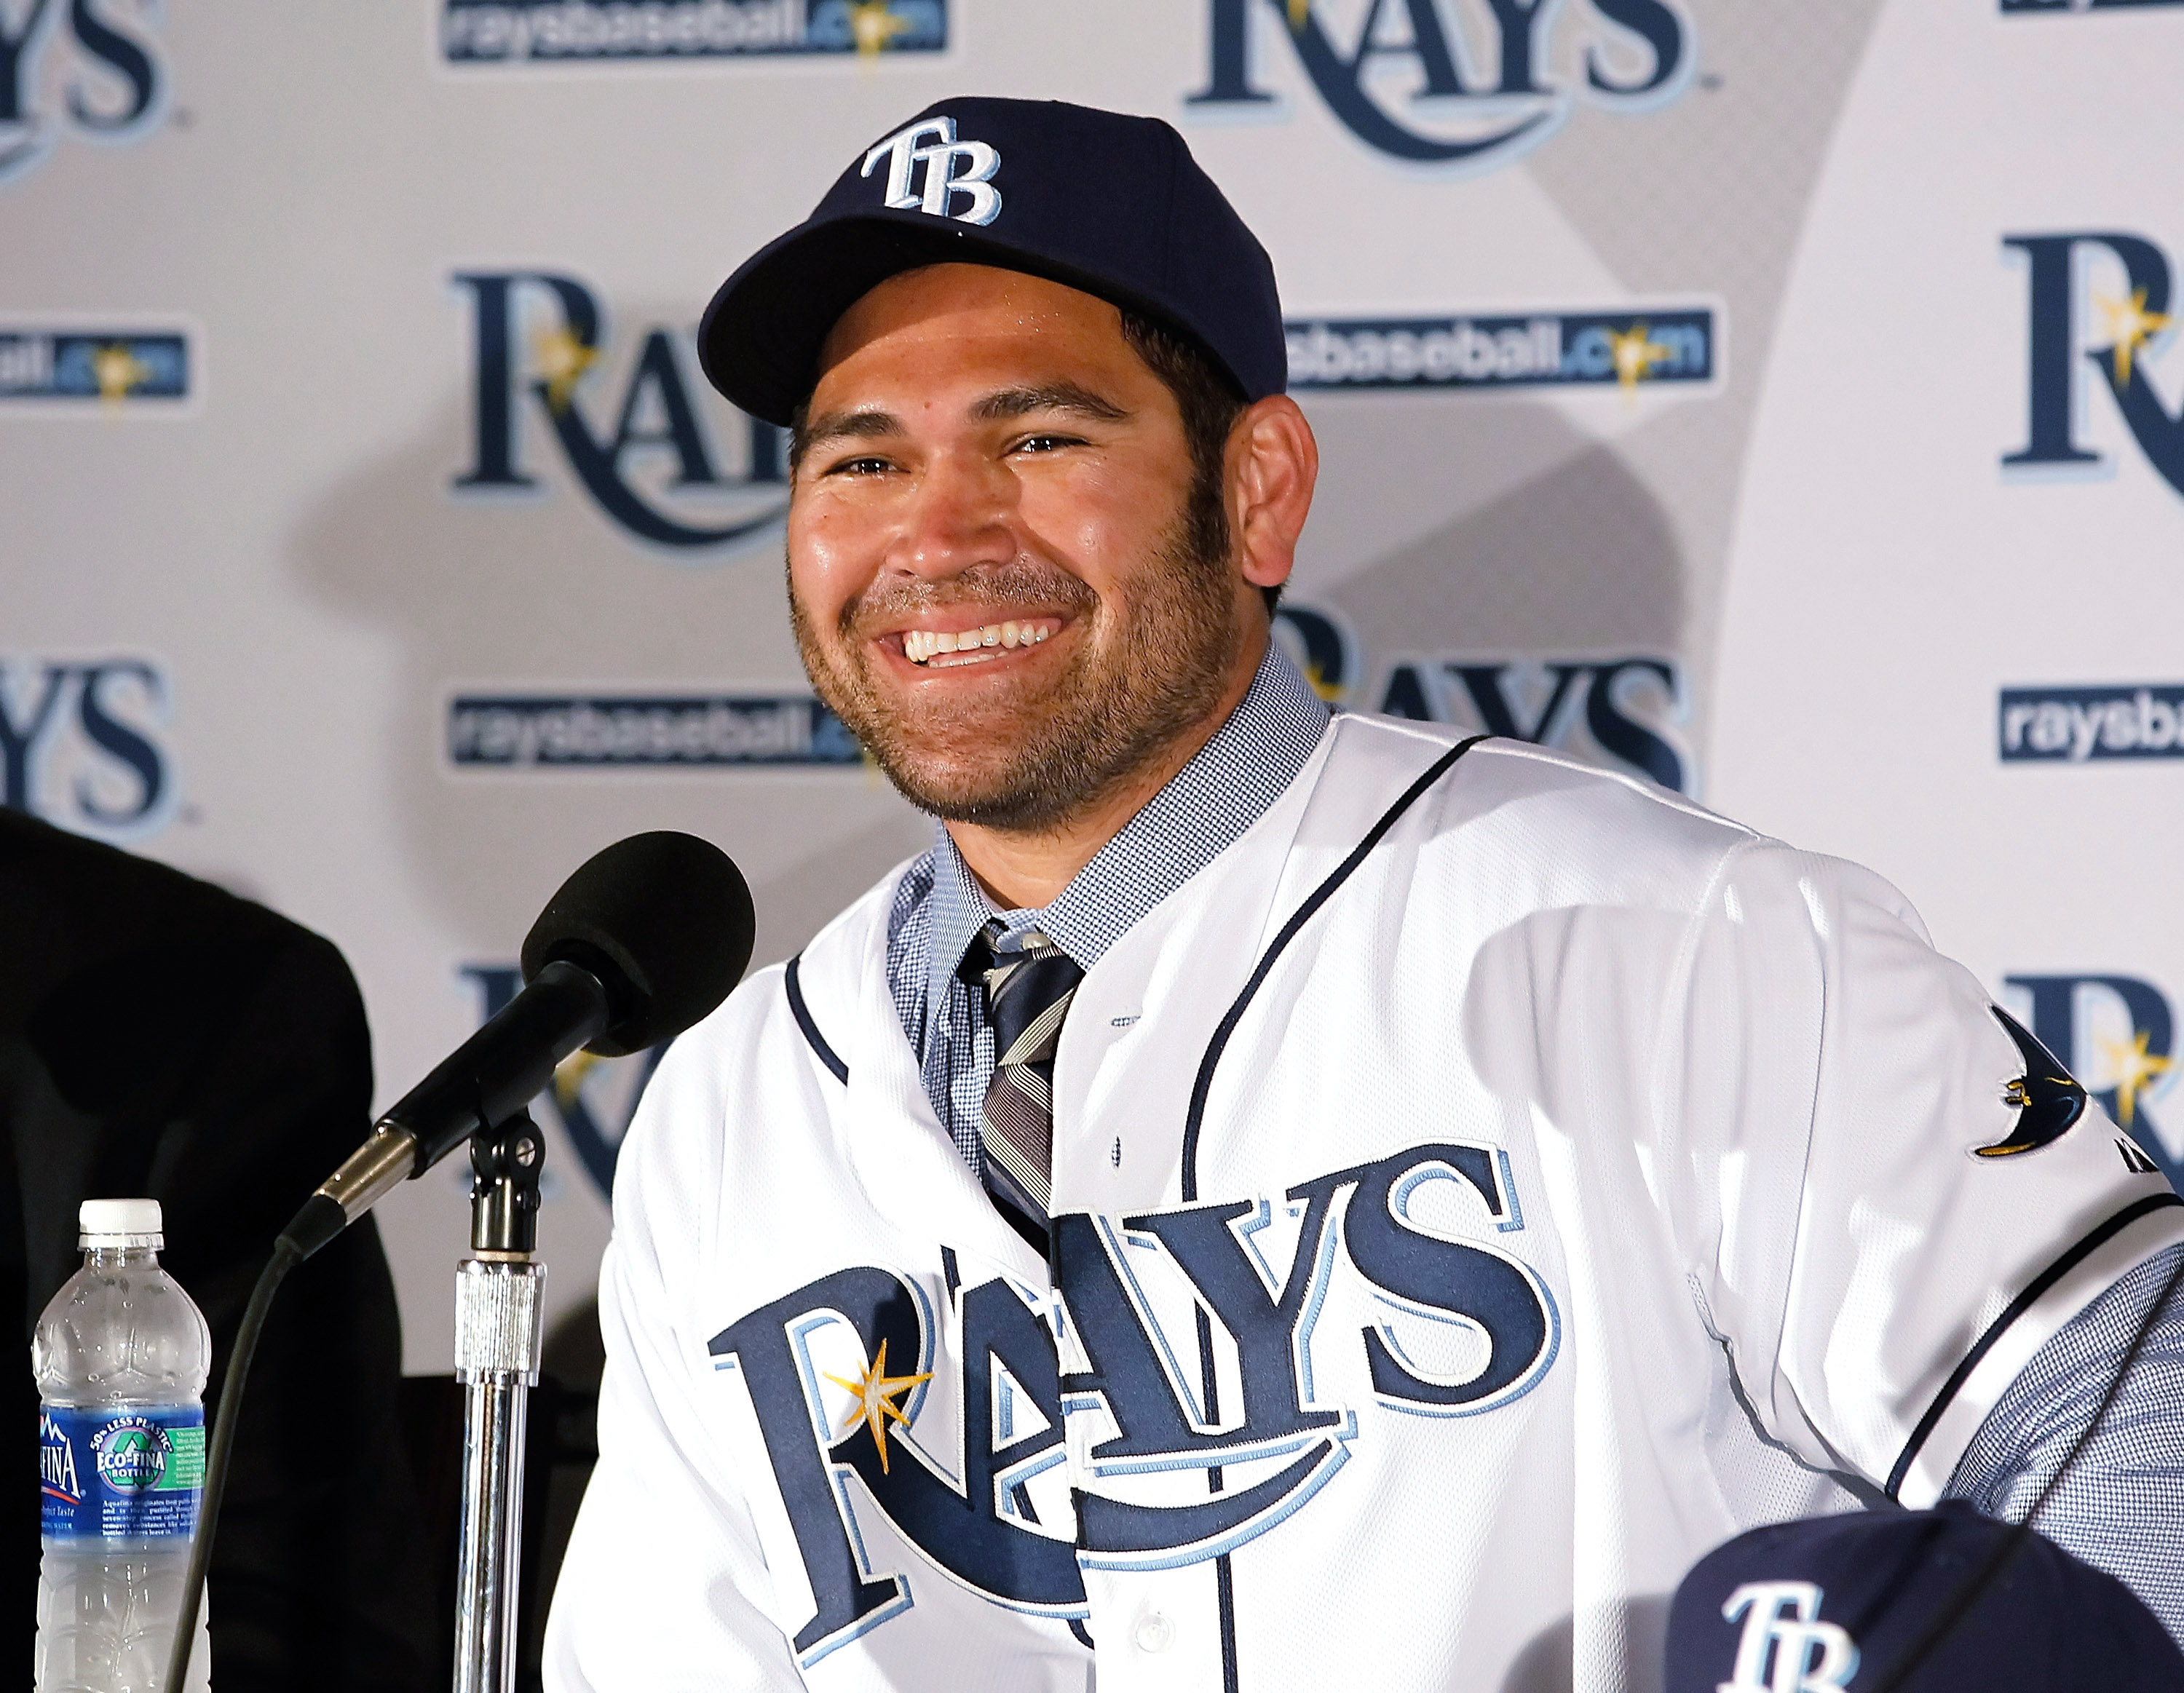 MLB Free Agency: Johnny Damon and 10 Players Who Picked the Wrong